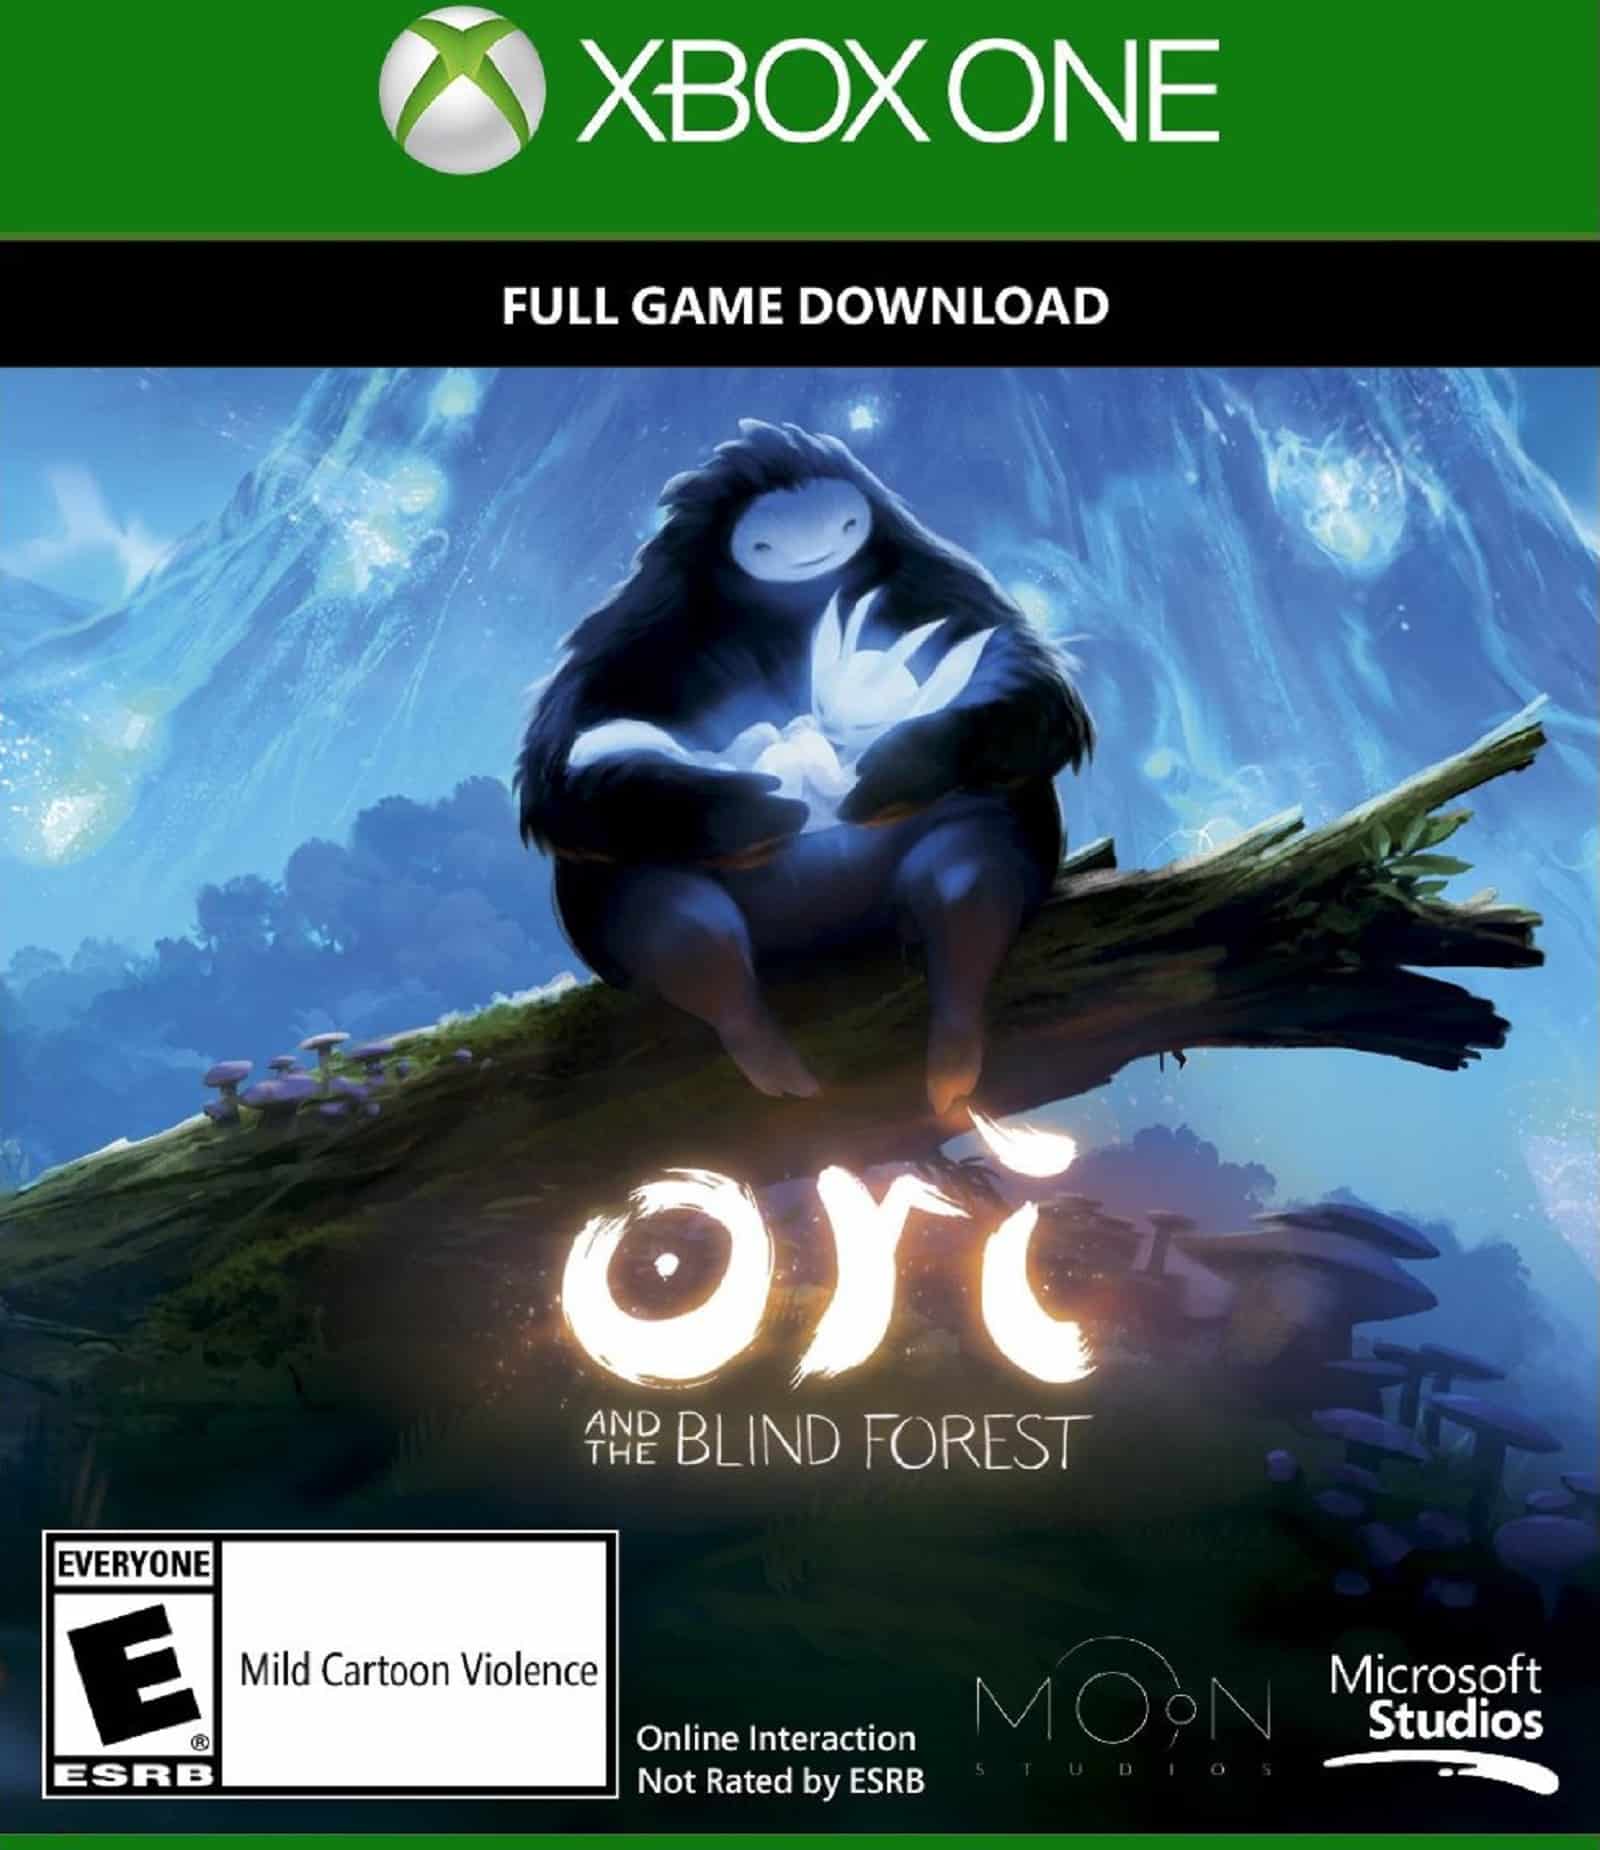 Kroniek Kinderpaleis Doen Xbox One Ori and the Blind Forest USA Box Artwork E for Everyone